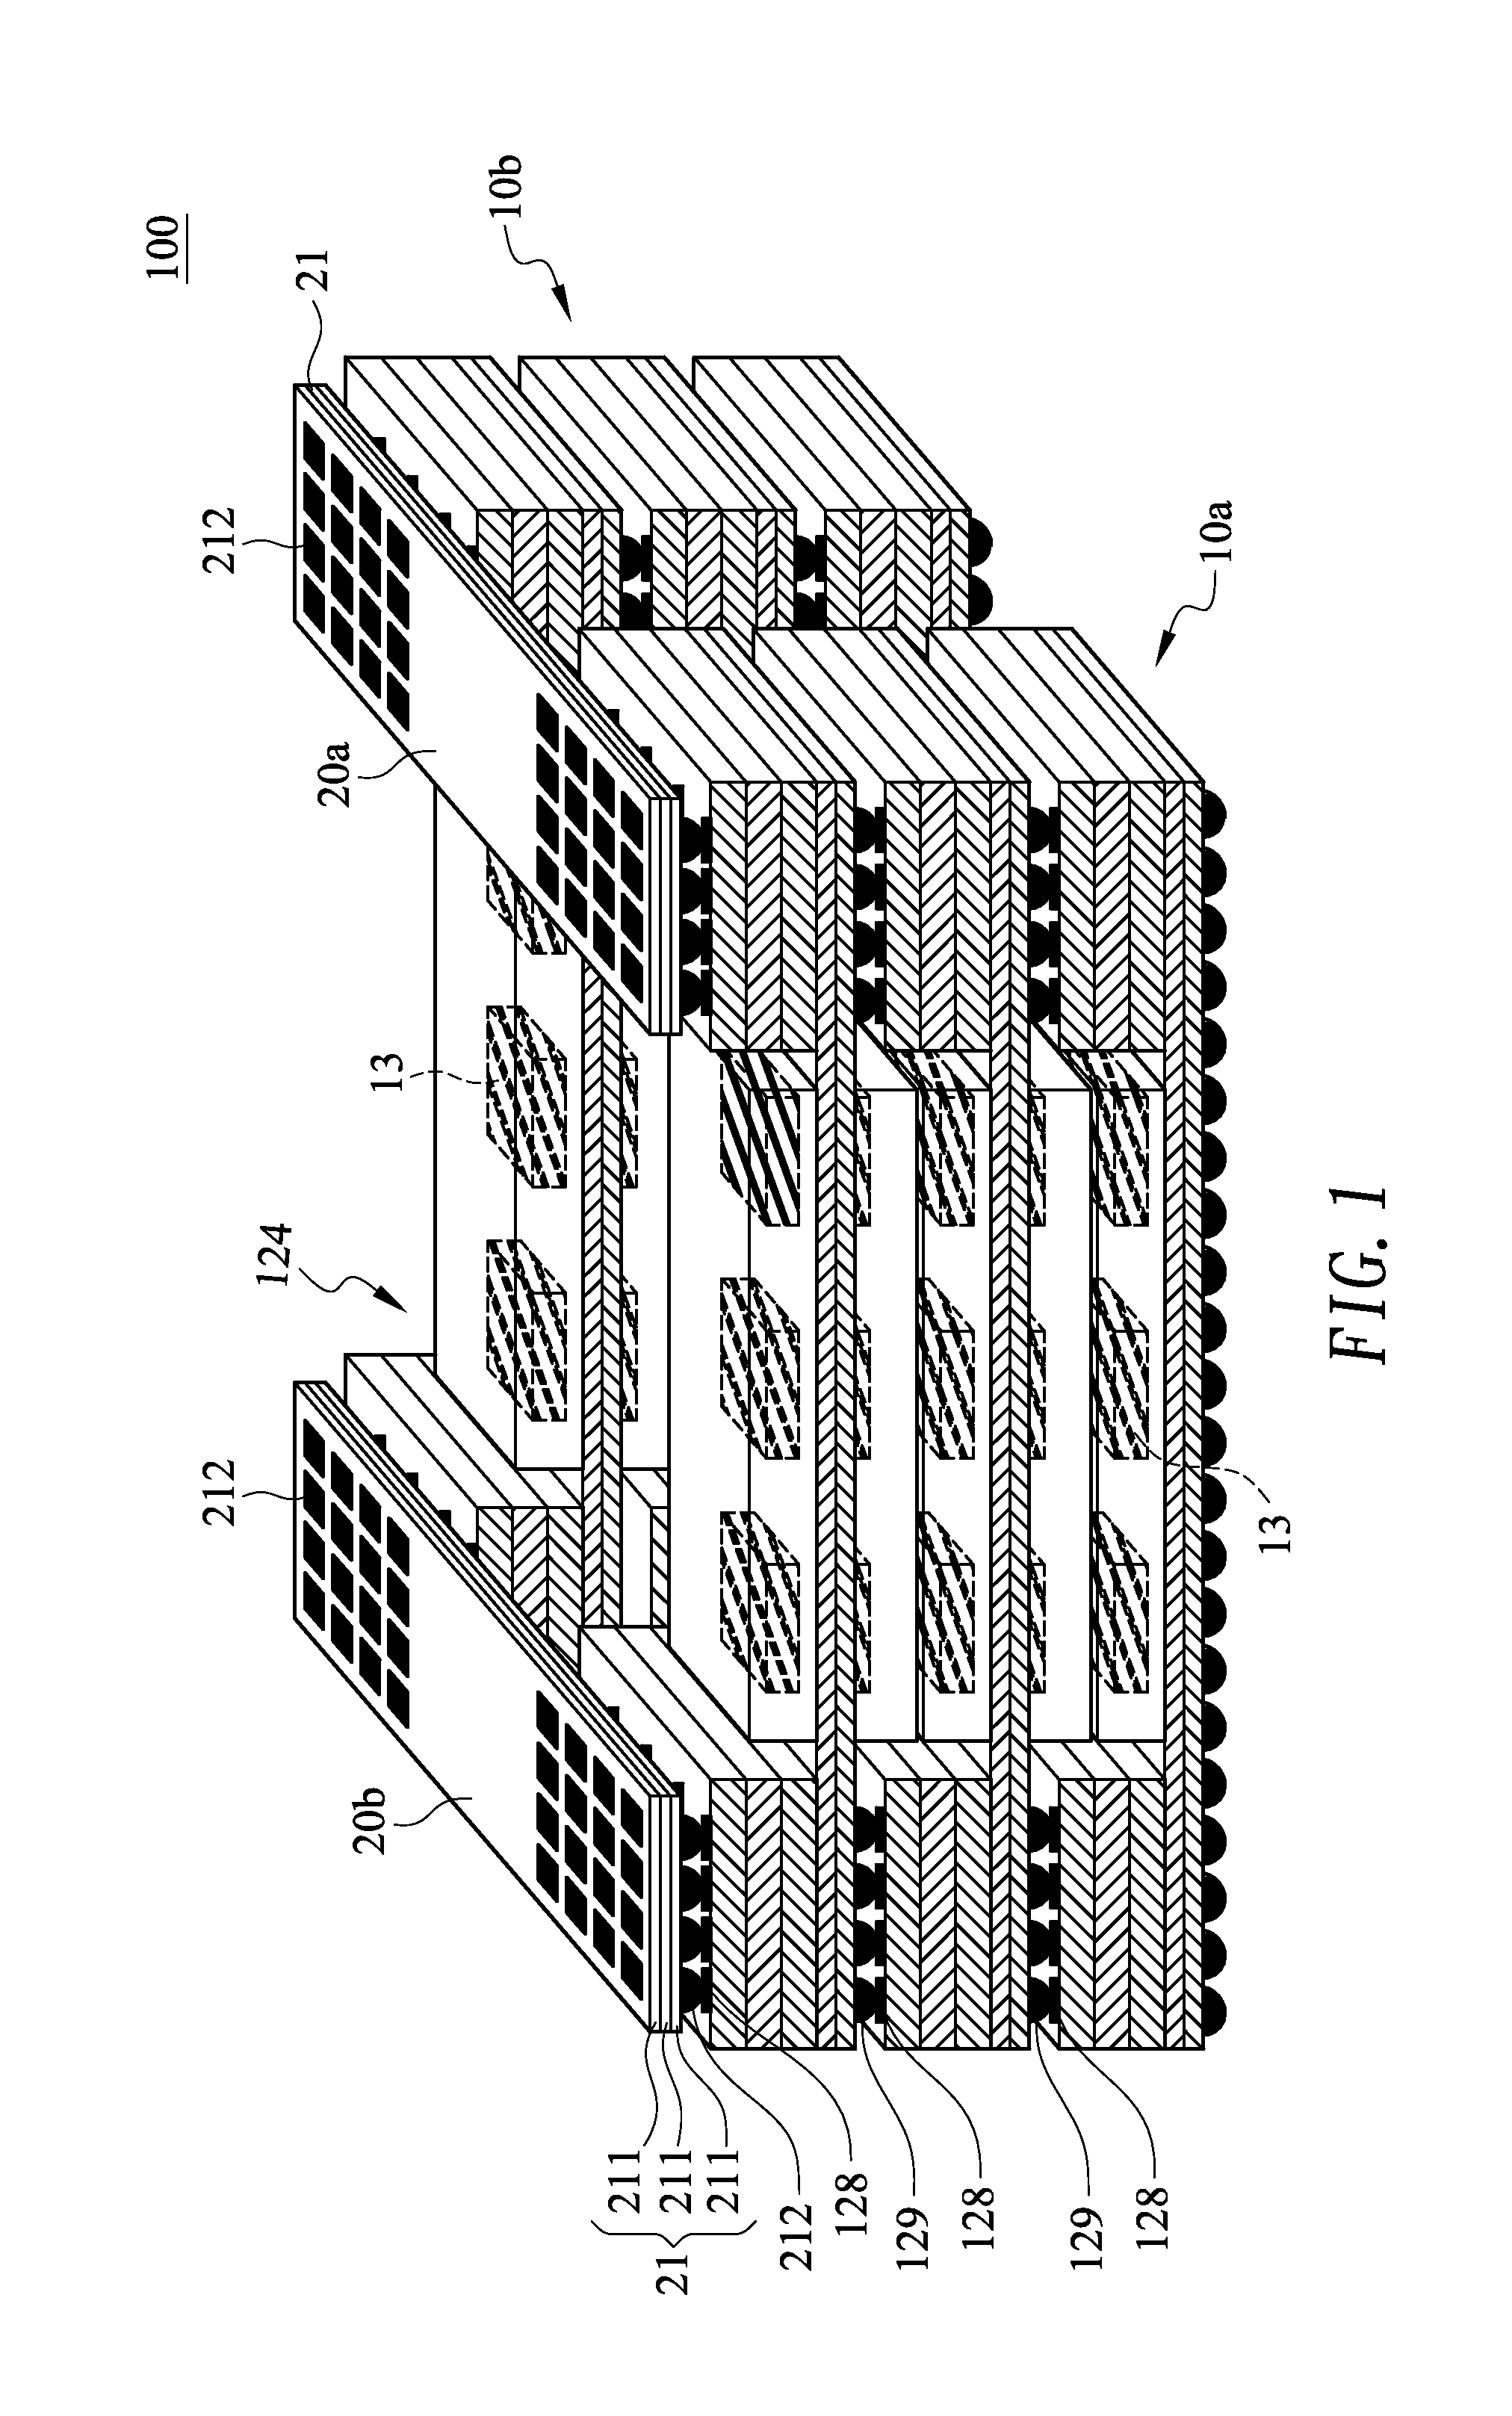 Three-dimensional soc structure formed by stacking multiple chip modules